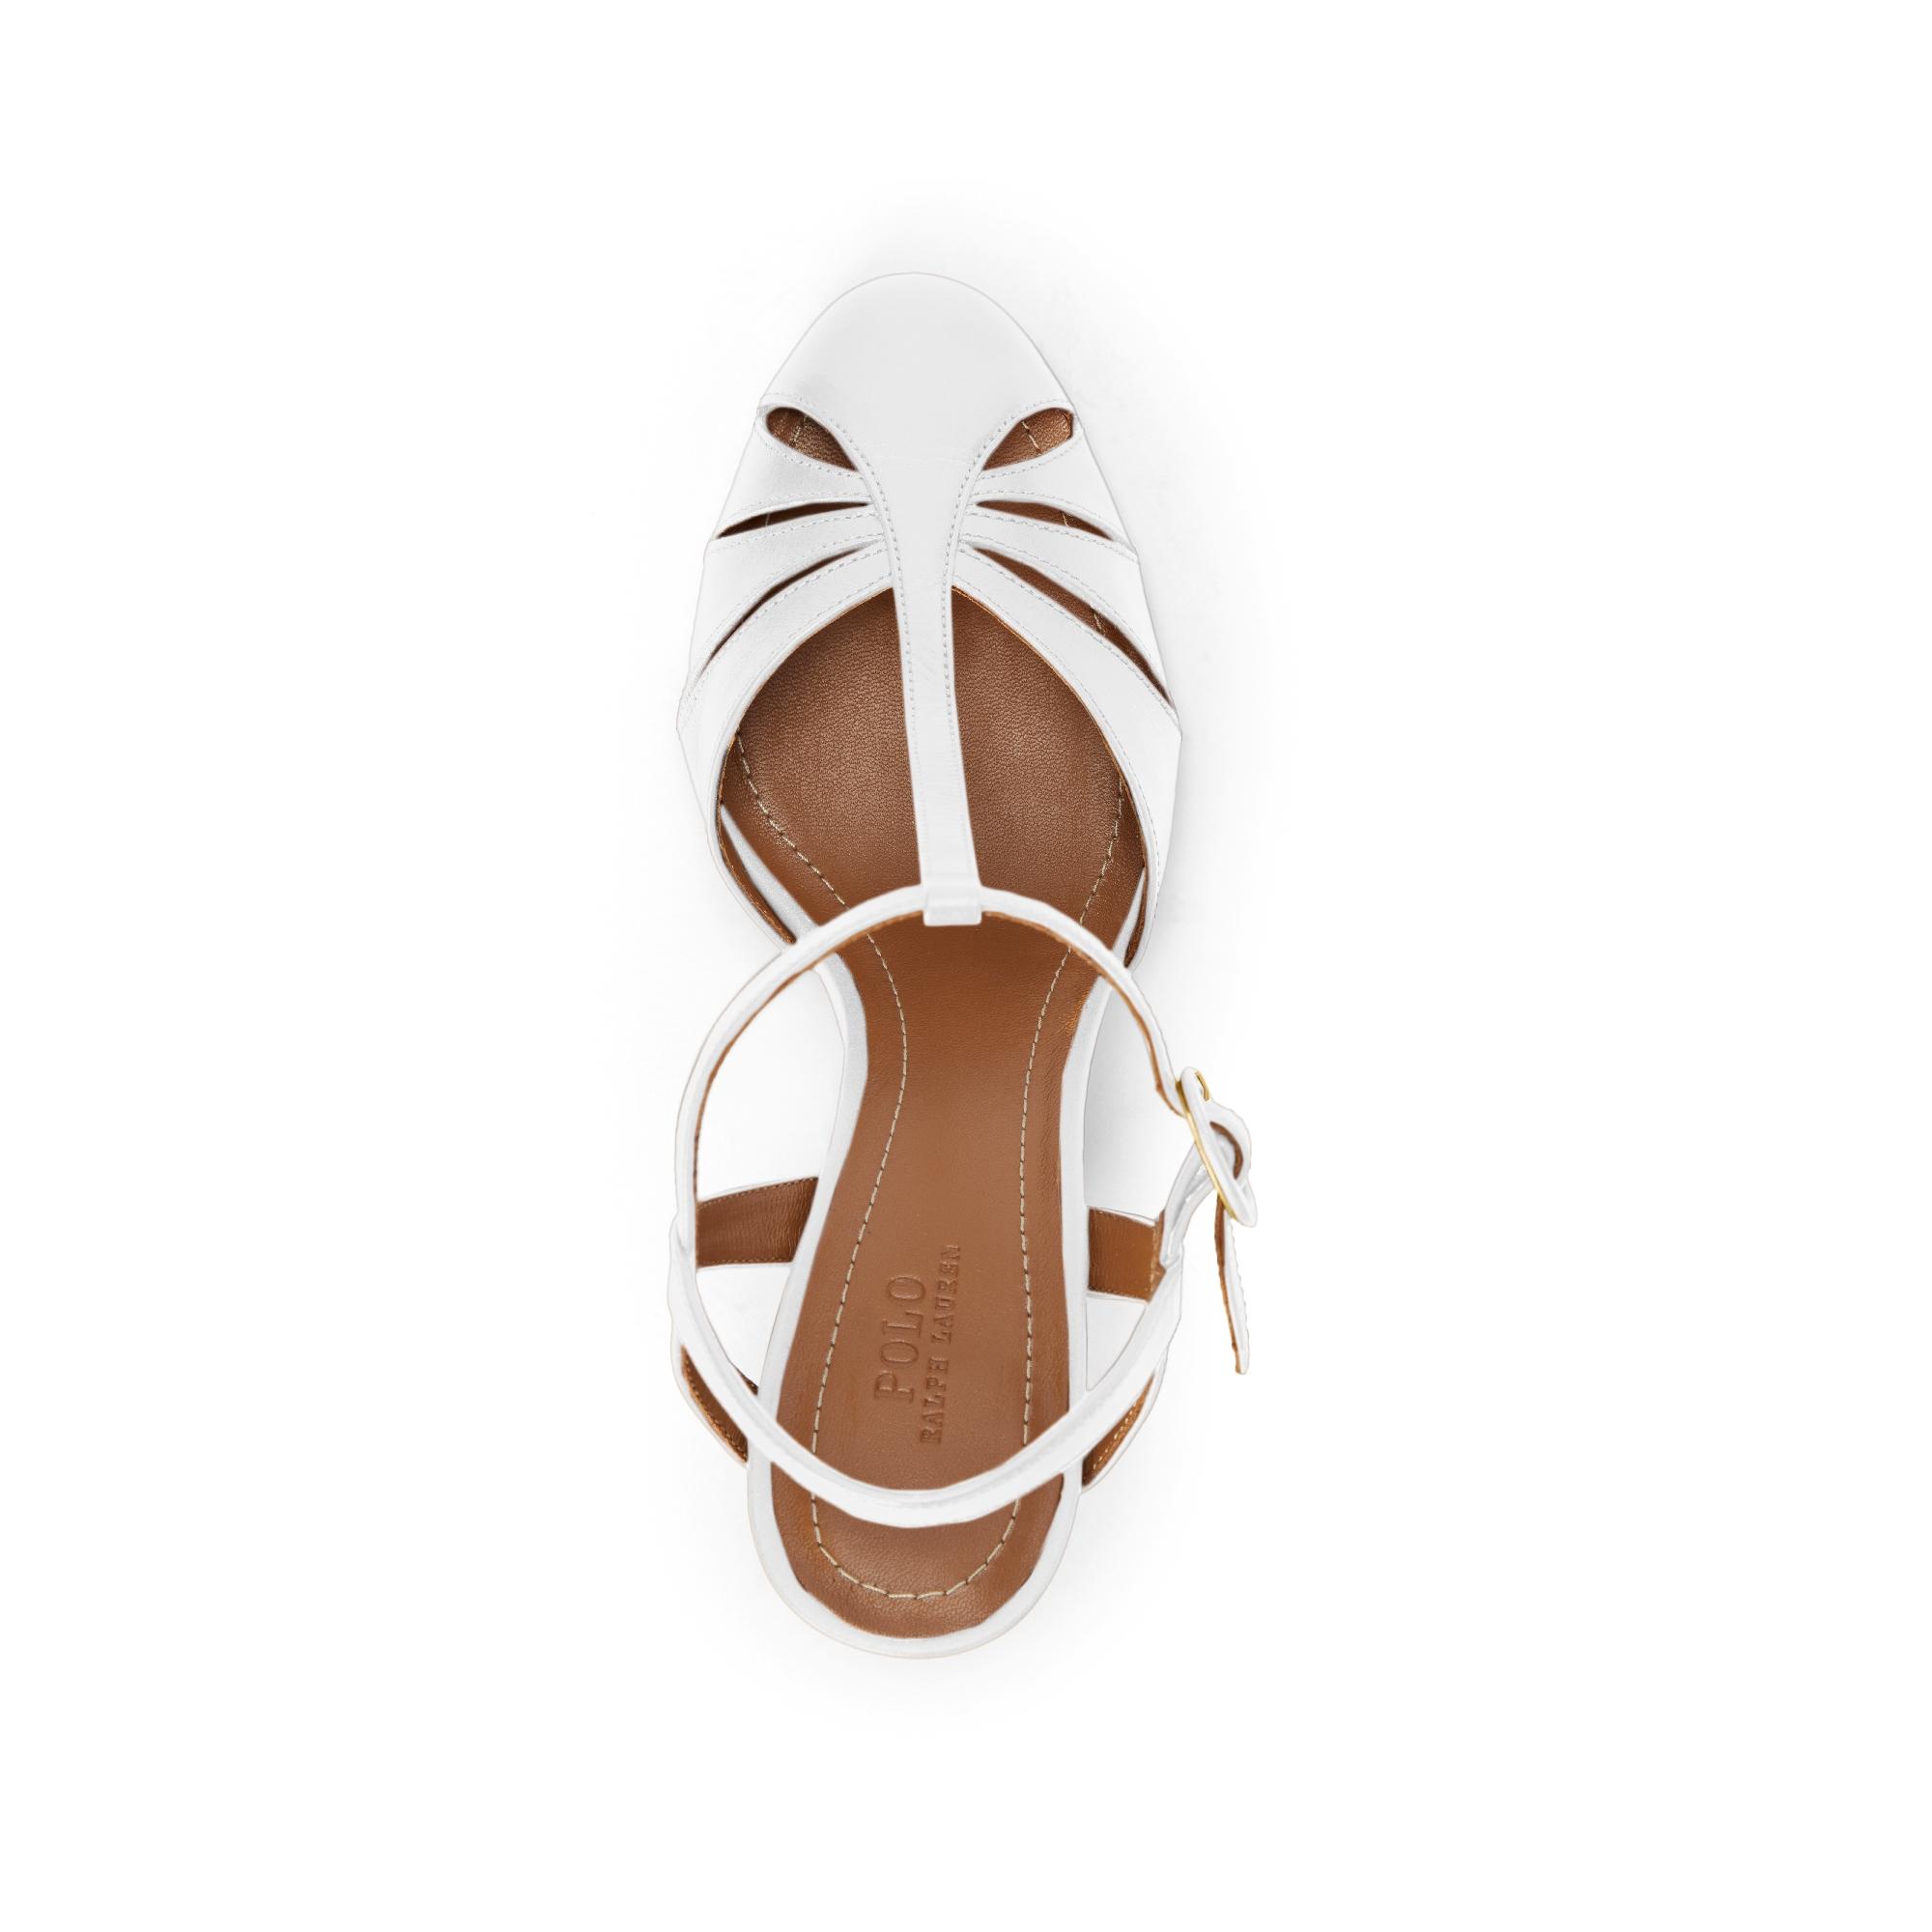 Ralph Lauren Leather Closed-toe Sandal in White - Lyst